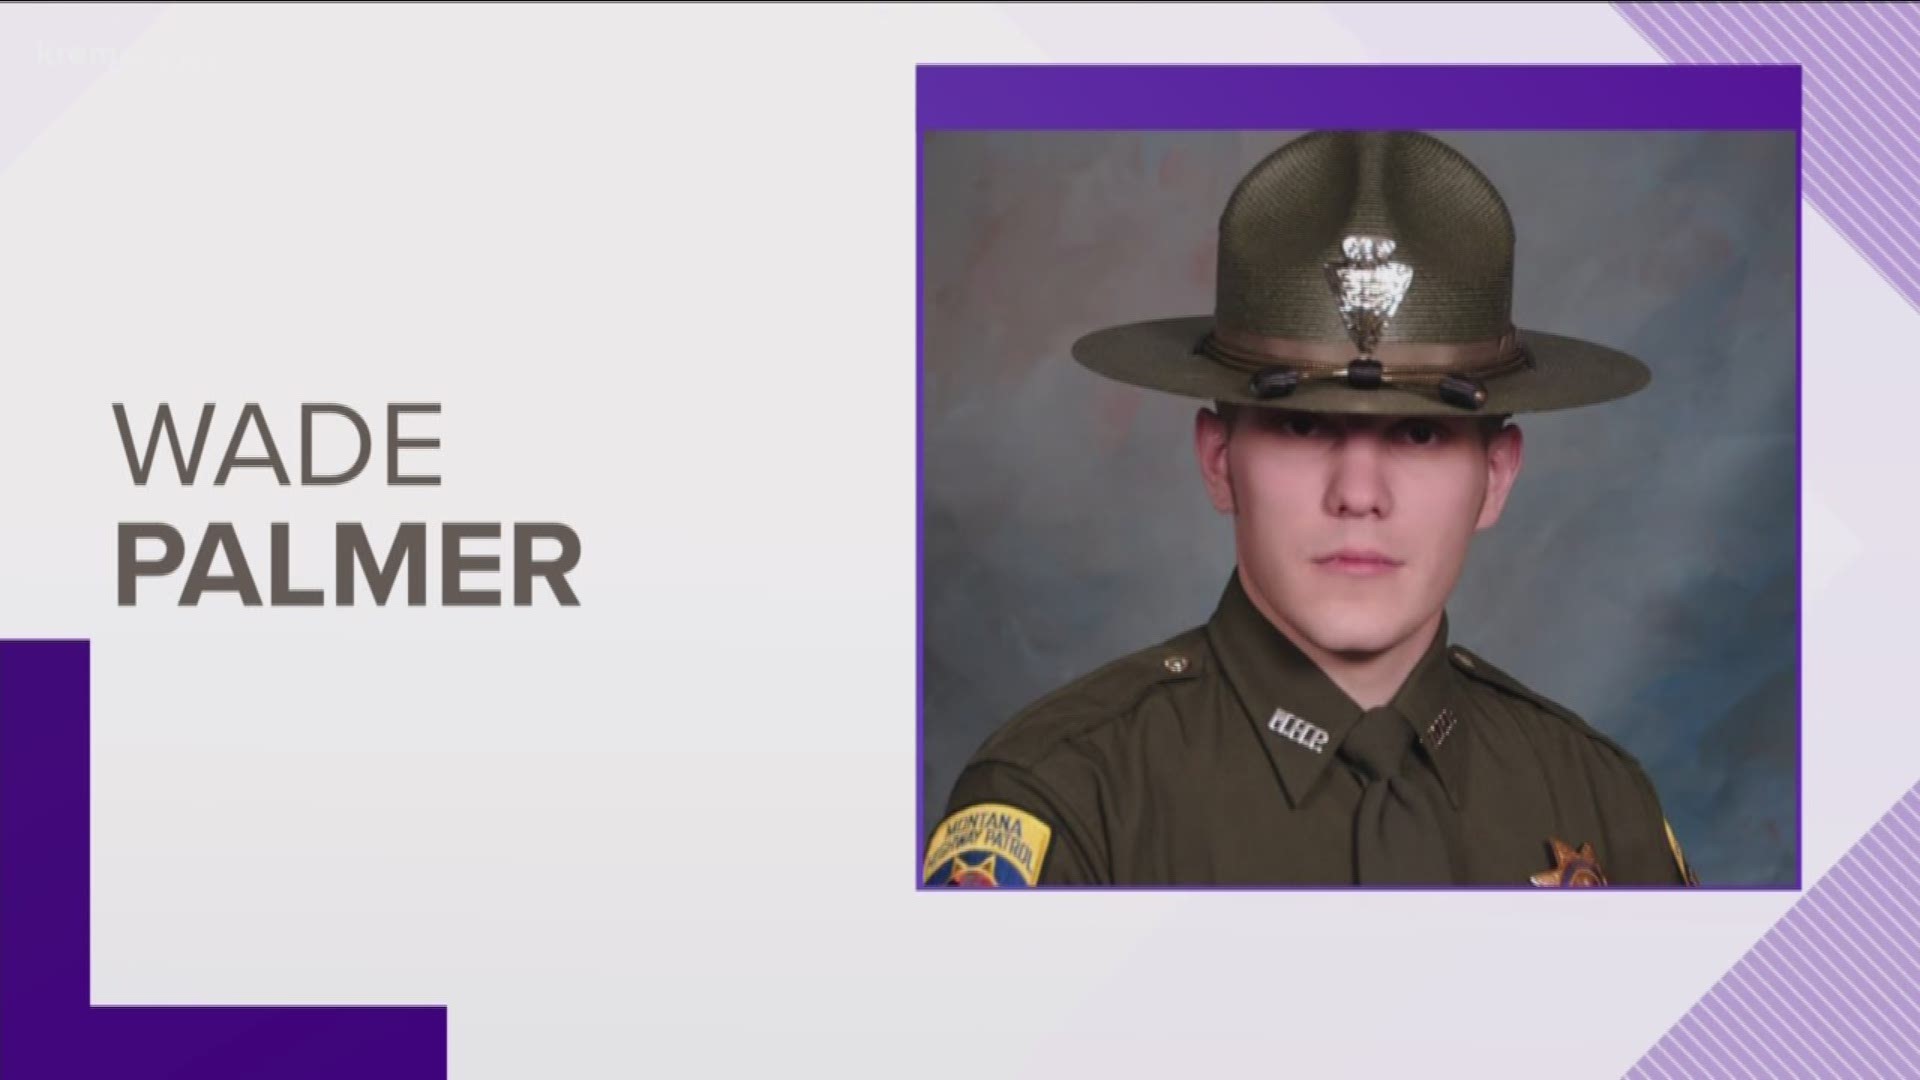 In 2015, Trooper Wade Palmer was awarded the Medal of Valor for his life-saving efforts at the scene of a crash involving a mom and her young children in Montana.